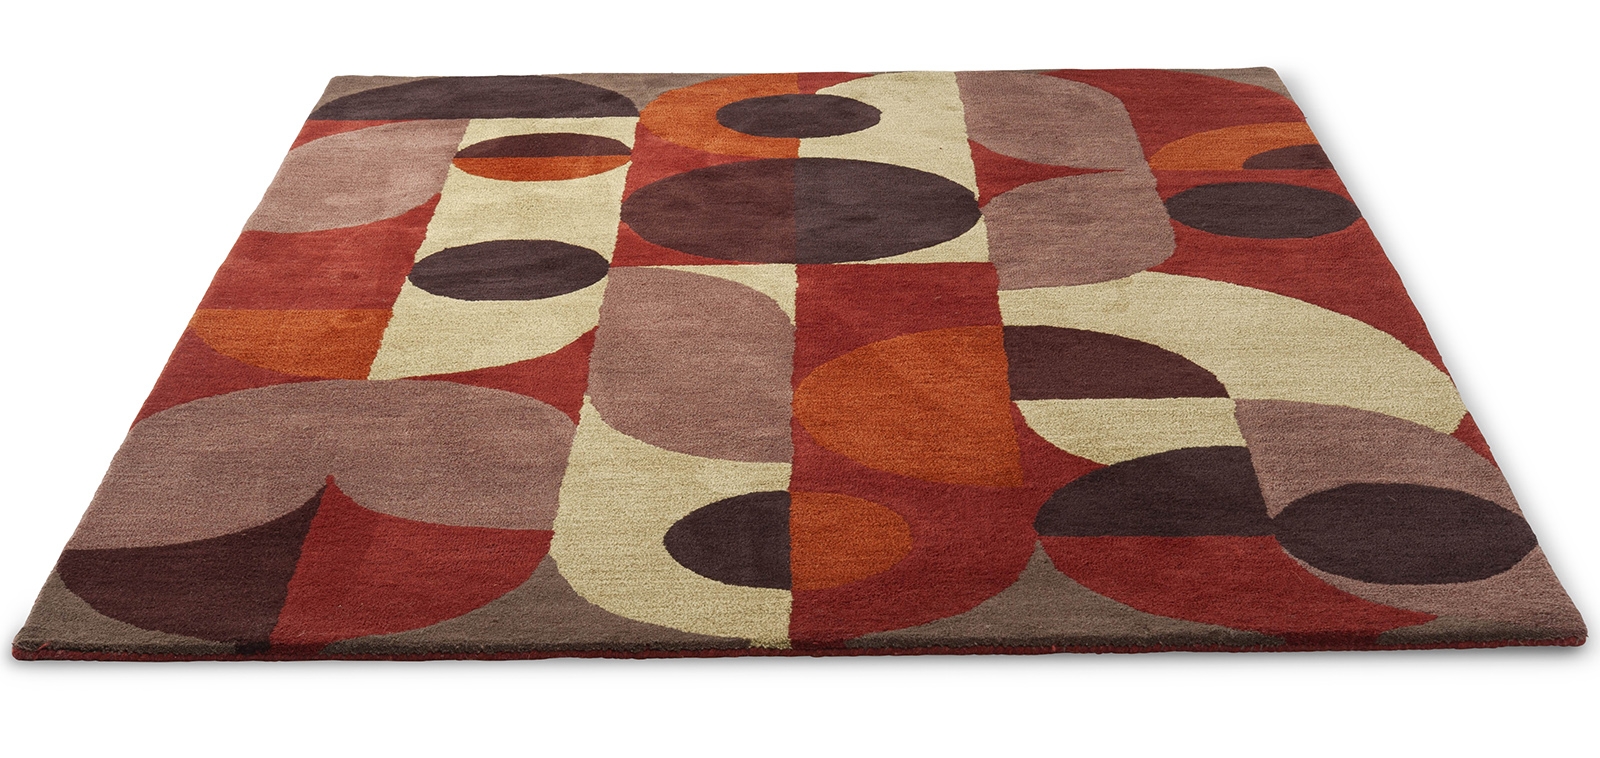 Decor Red Pale Rug ☞ Size: 160 x 230 cm